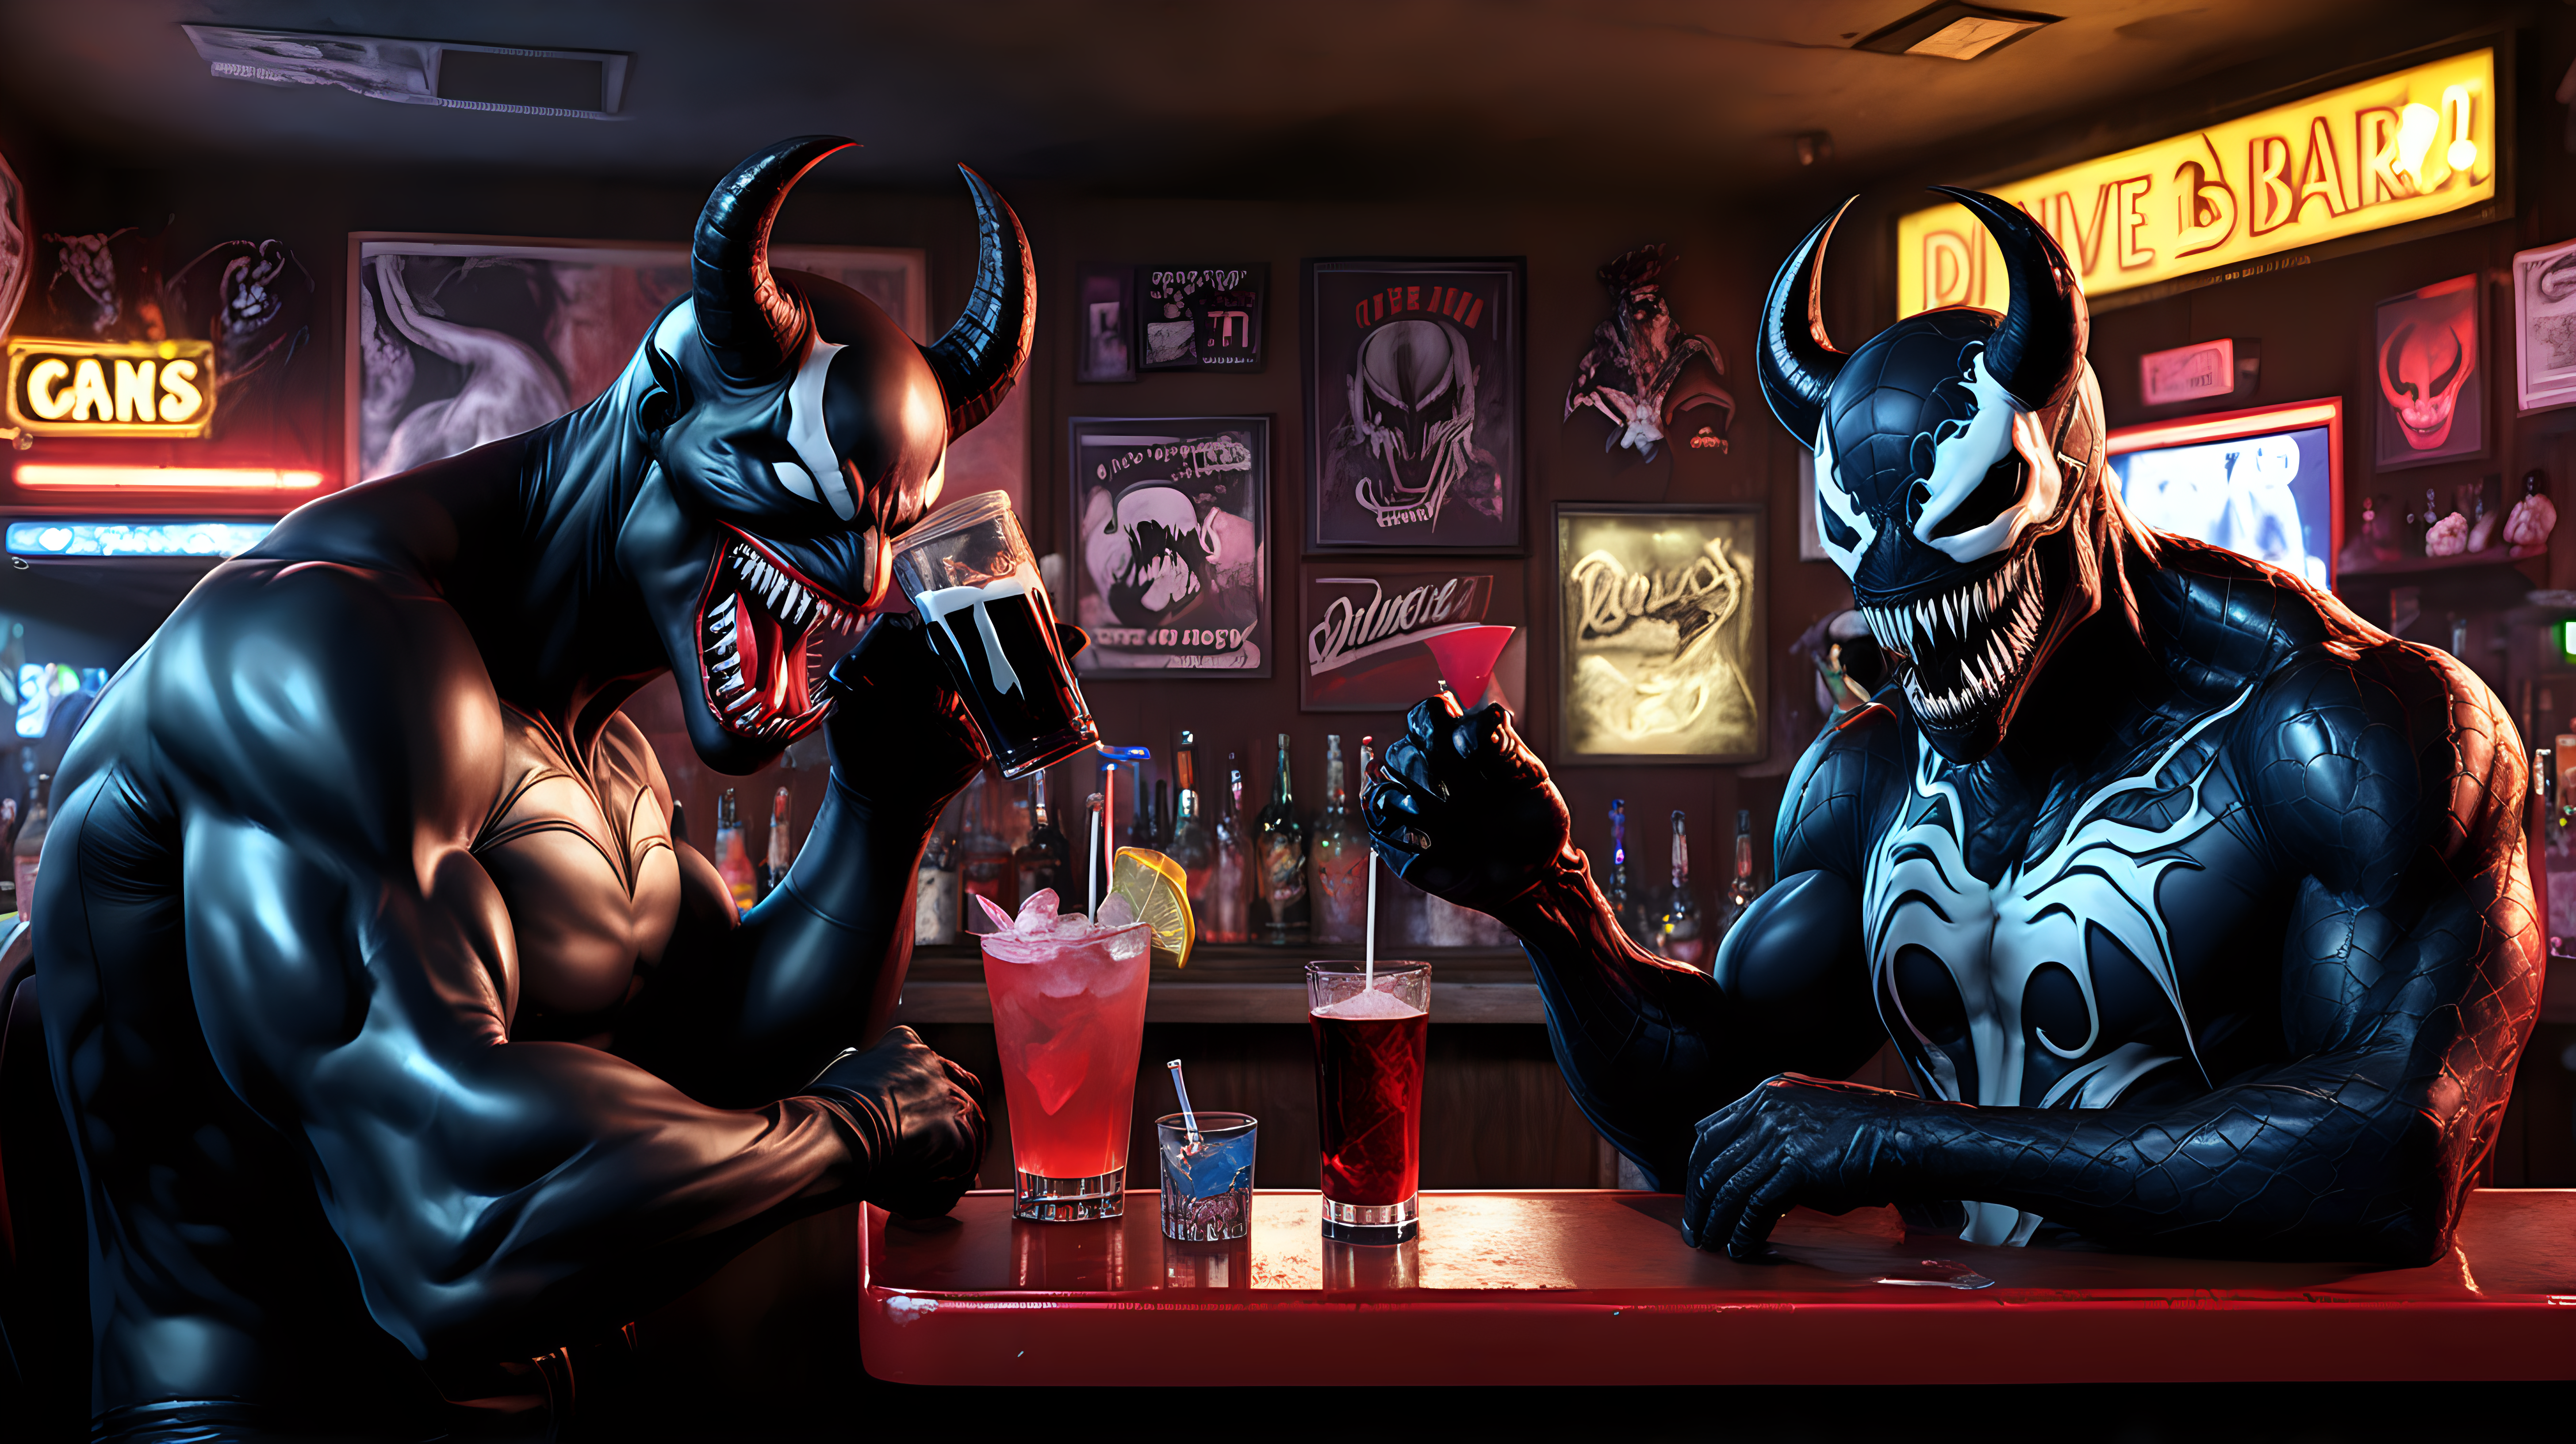 Devil and Venom have drinks in a dive